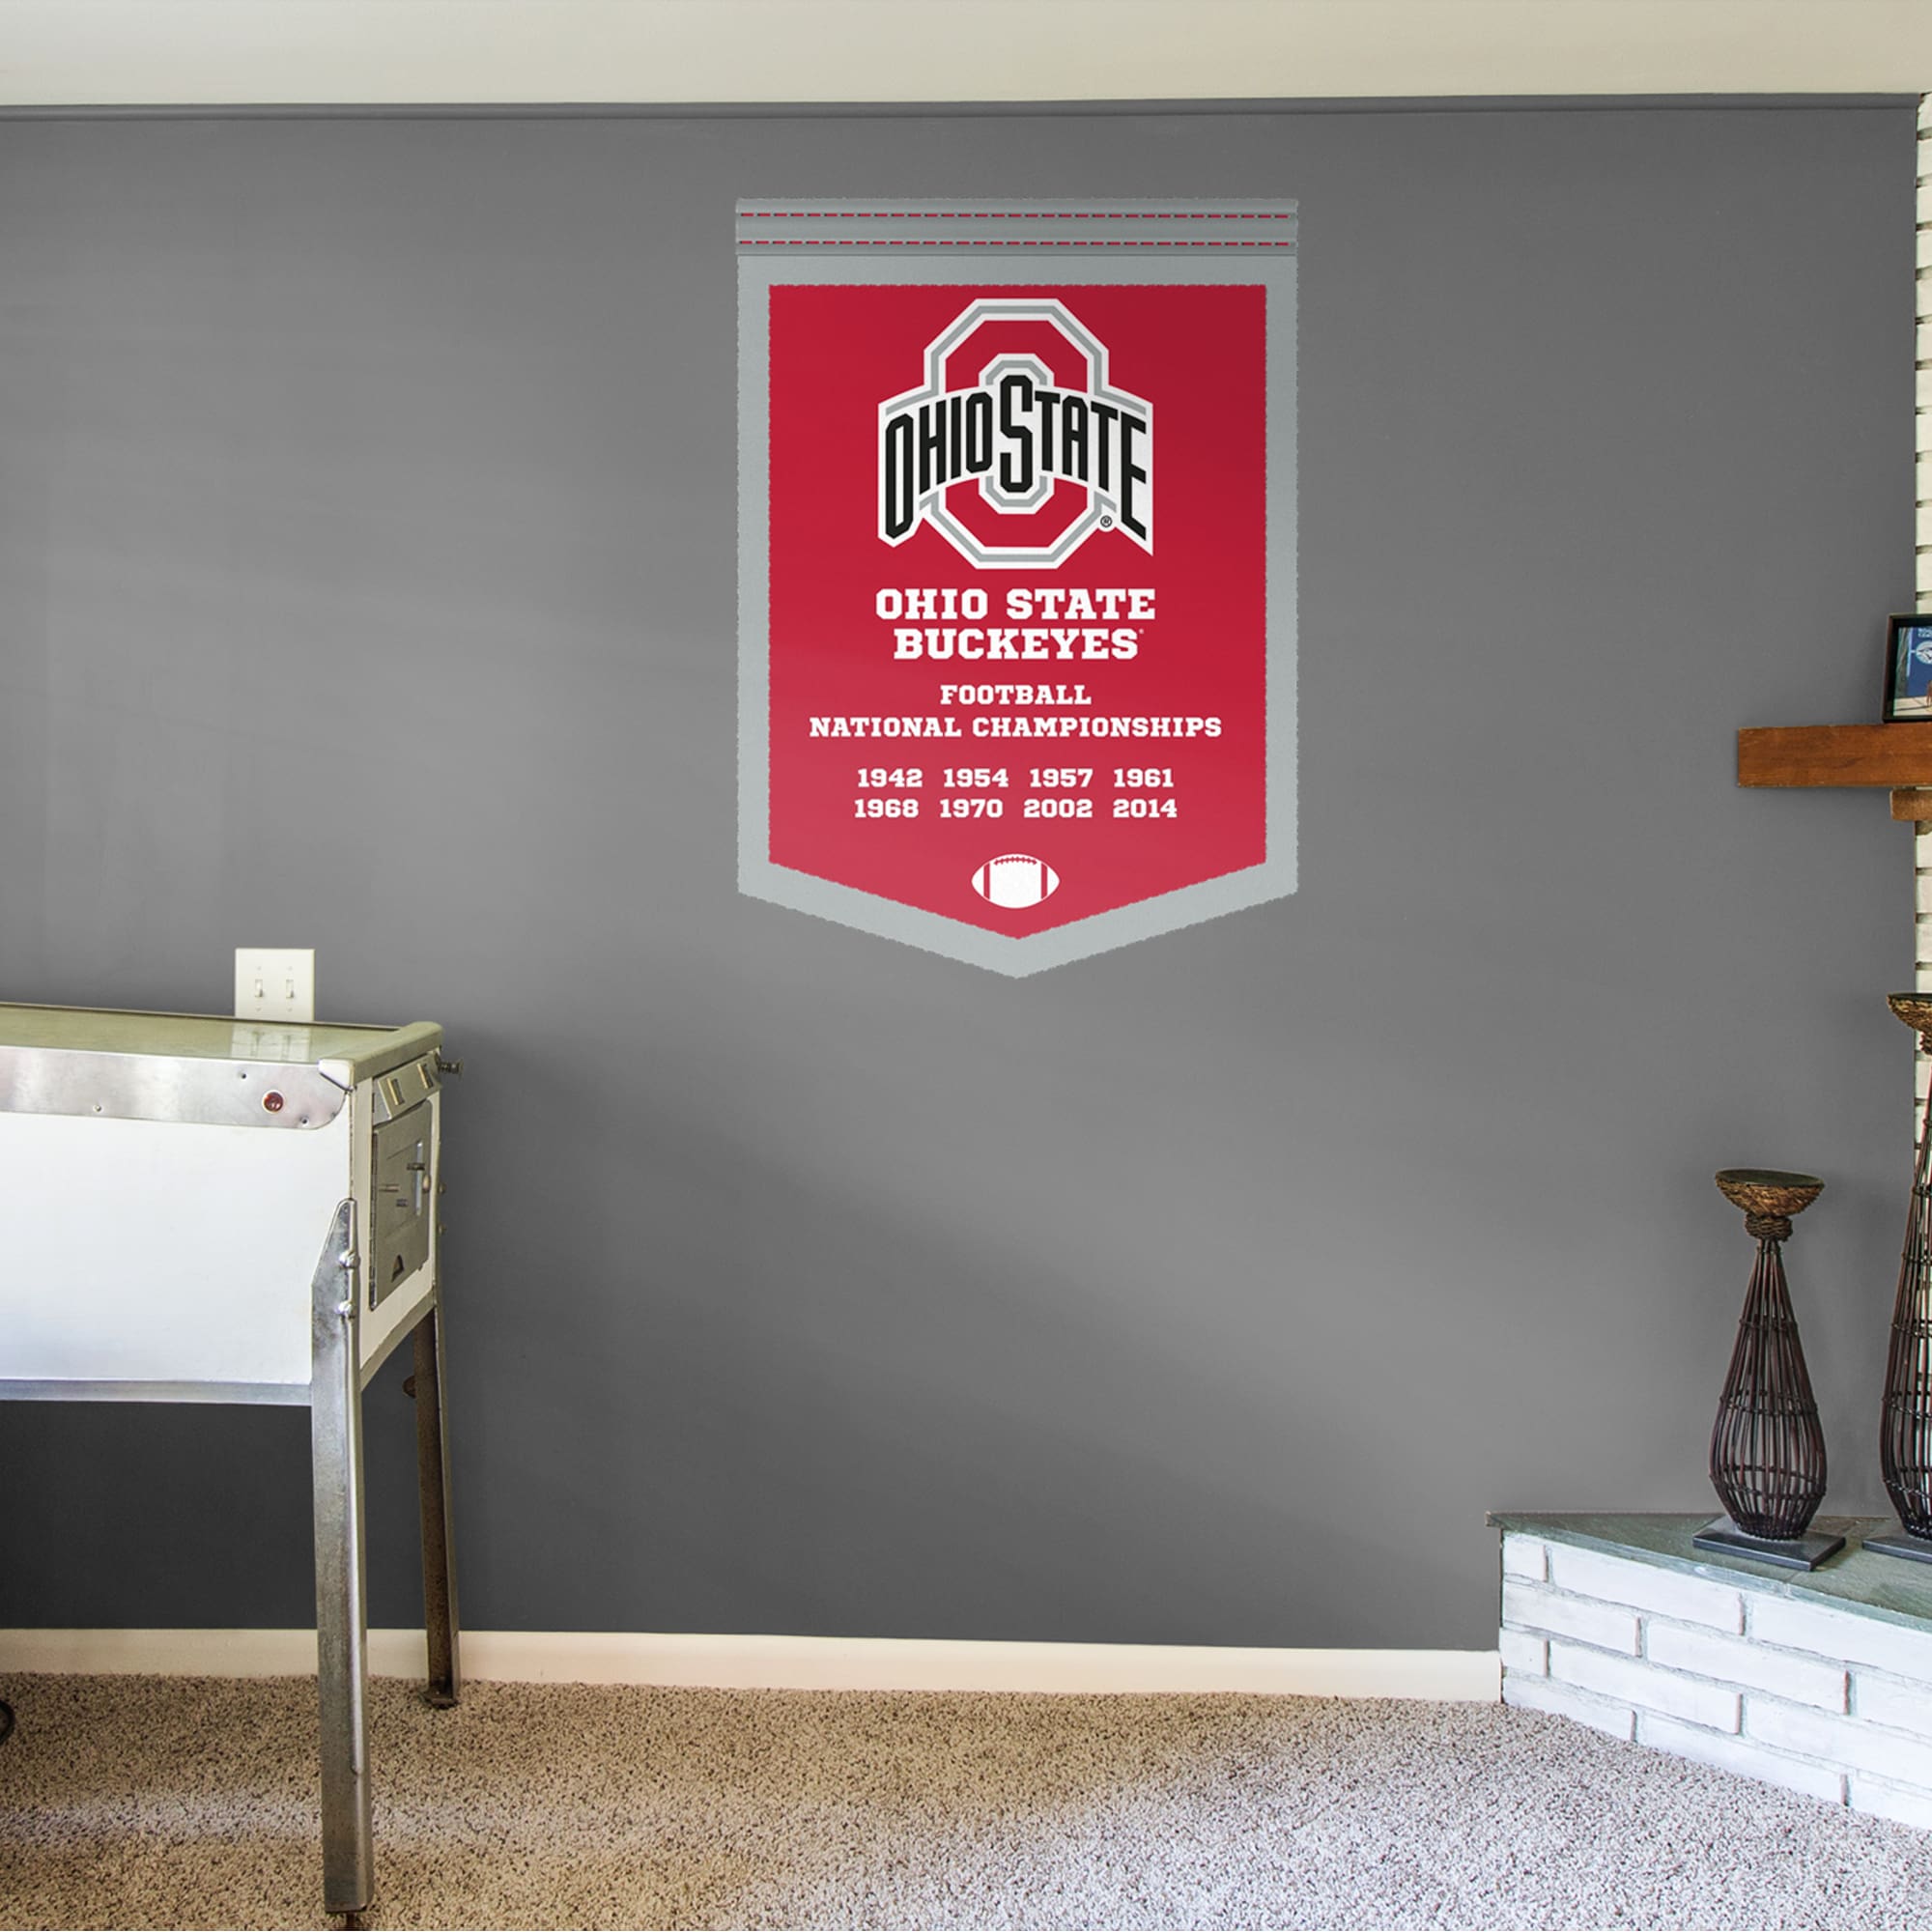 Ohio State Buckeyes: Football National Championship Banner - Officially Licensed Removable Wall Decal 34.0"W x 48.0"H by Fathead